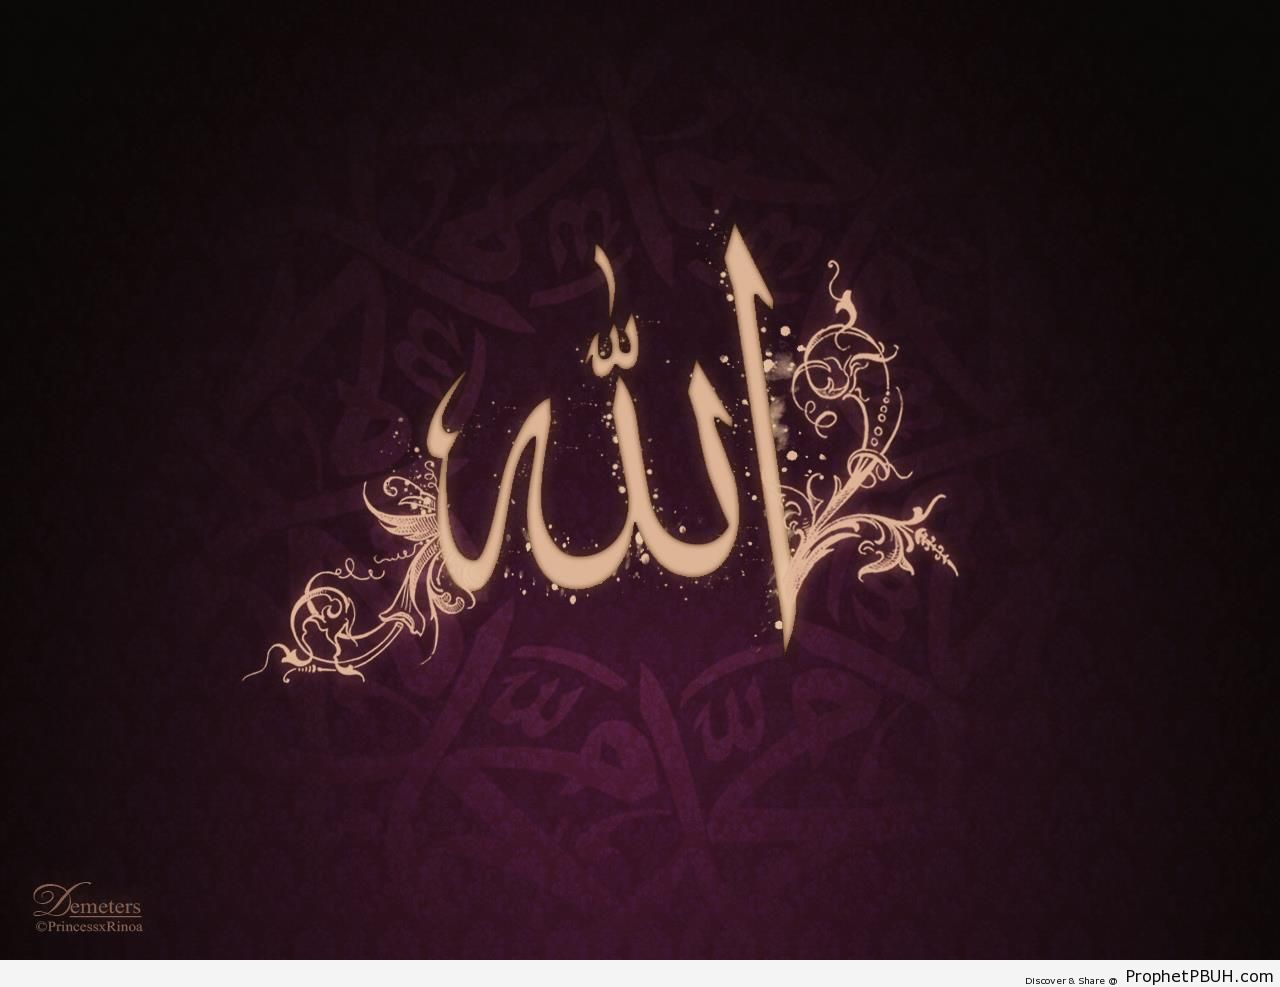 Calligraphy of Allah-s Name With Decorative Organic Developments (Desktop Wallpaper) - Allah Calligraphy and Typography 